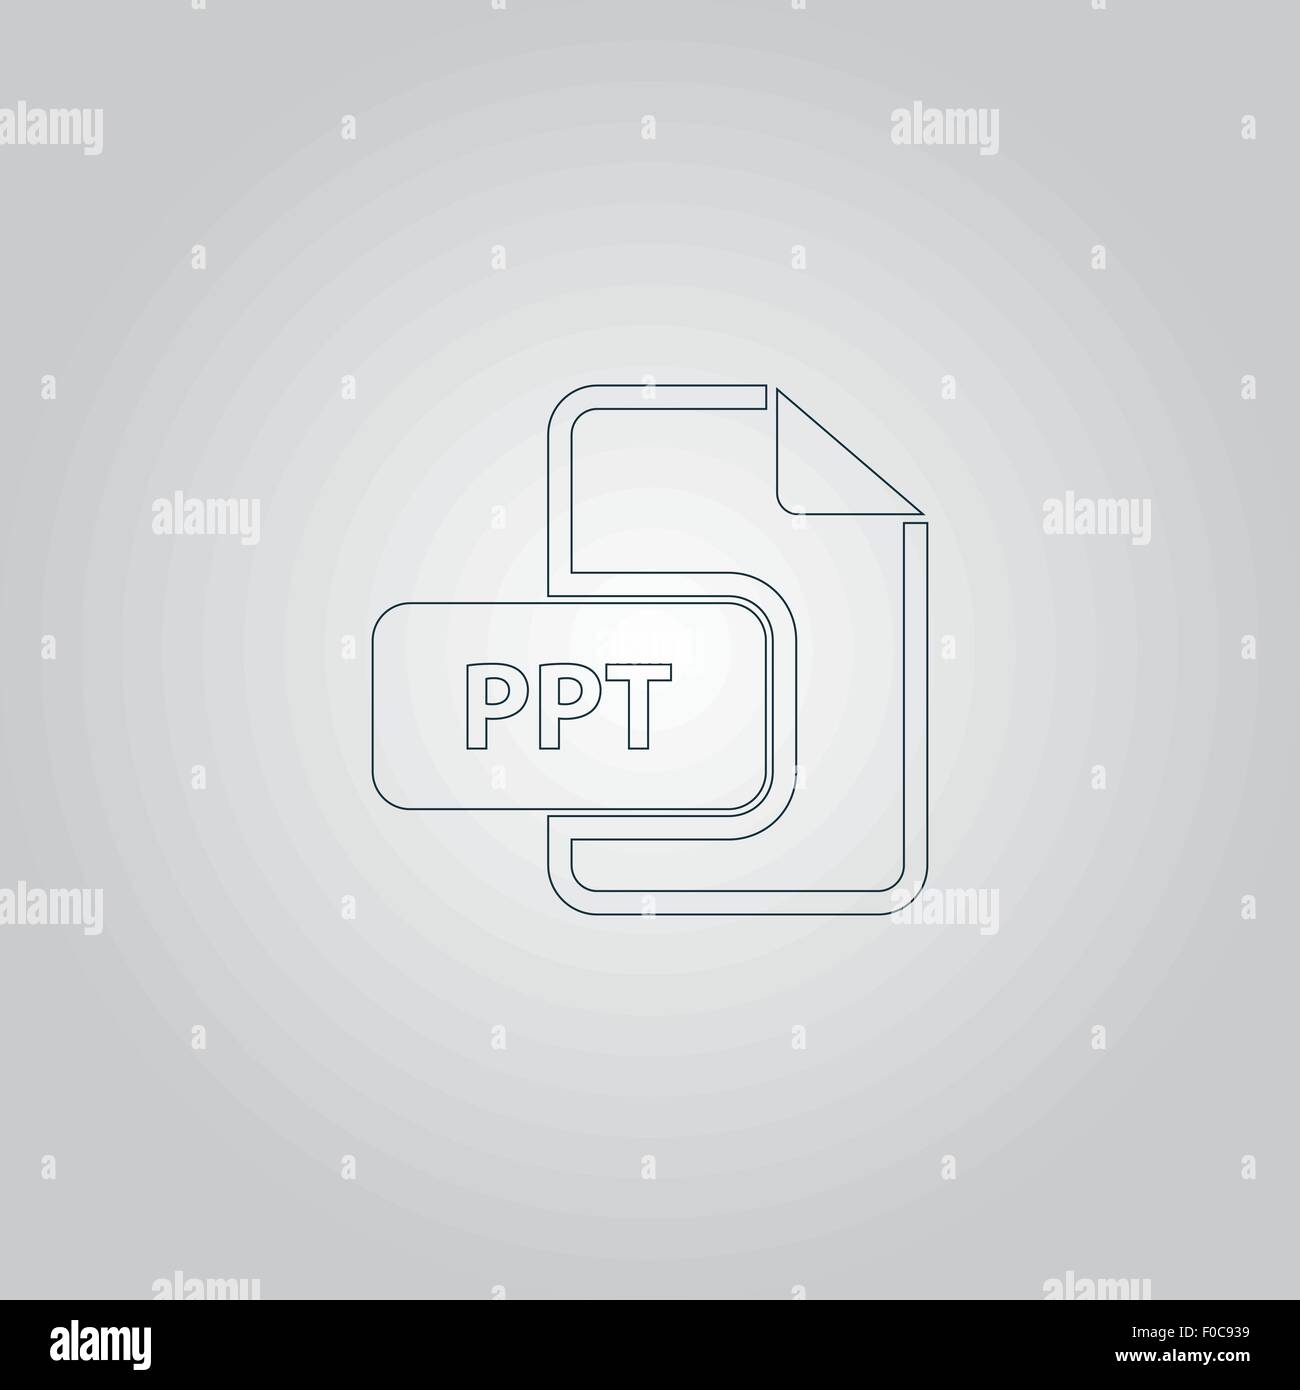 PPT extension text file type icon Stock Vector